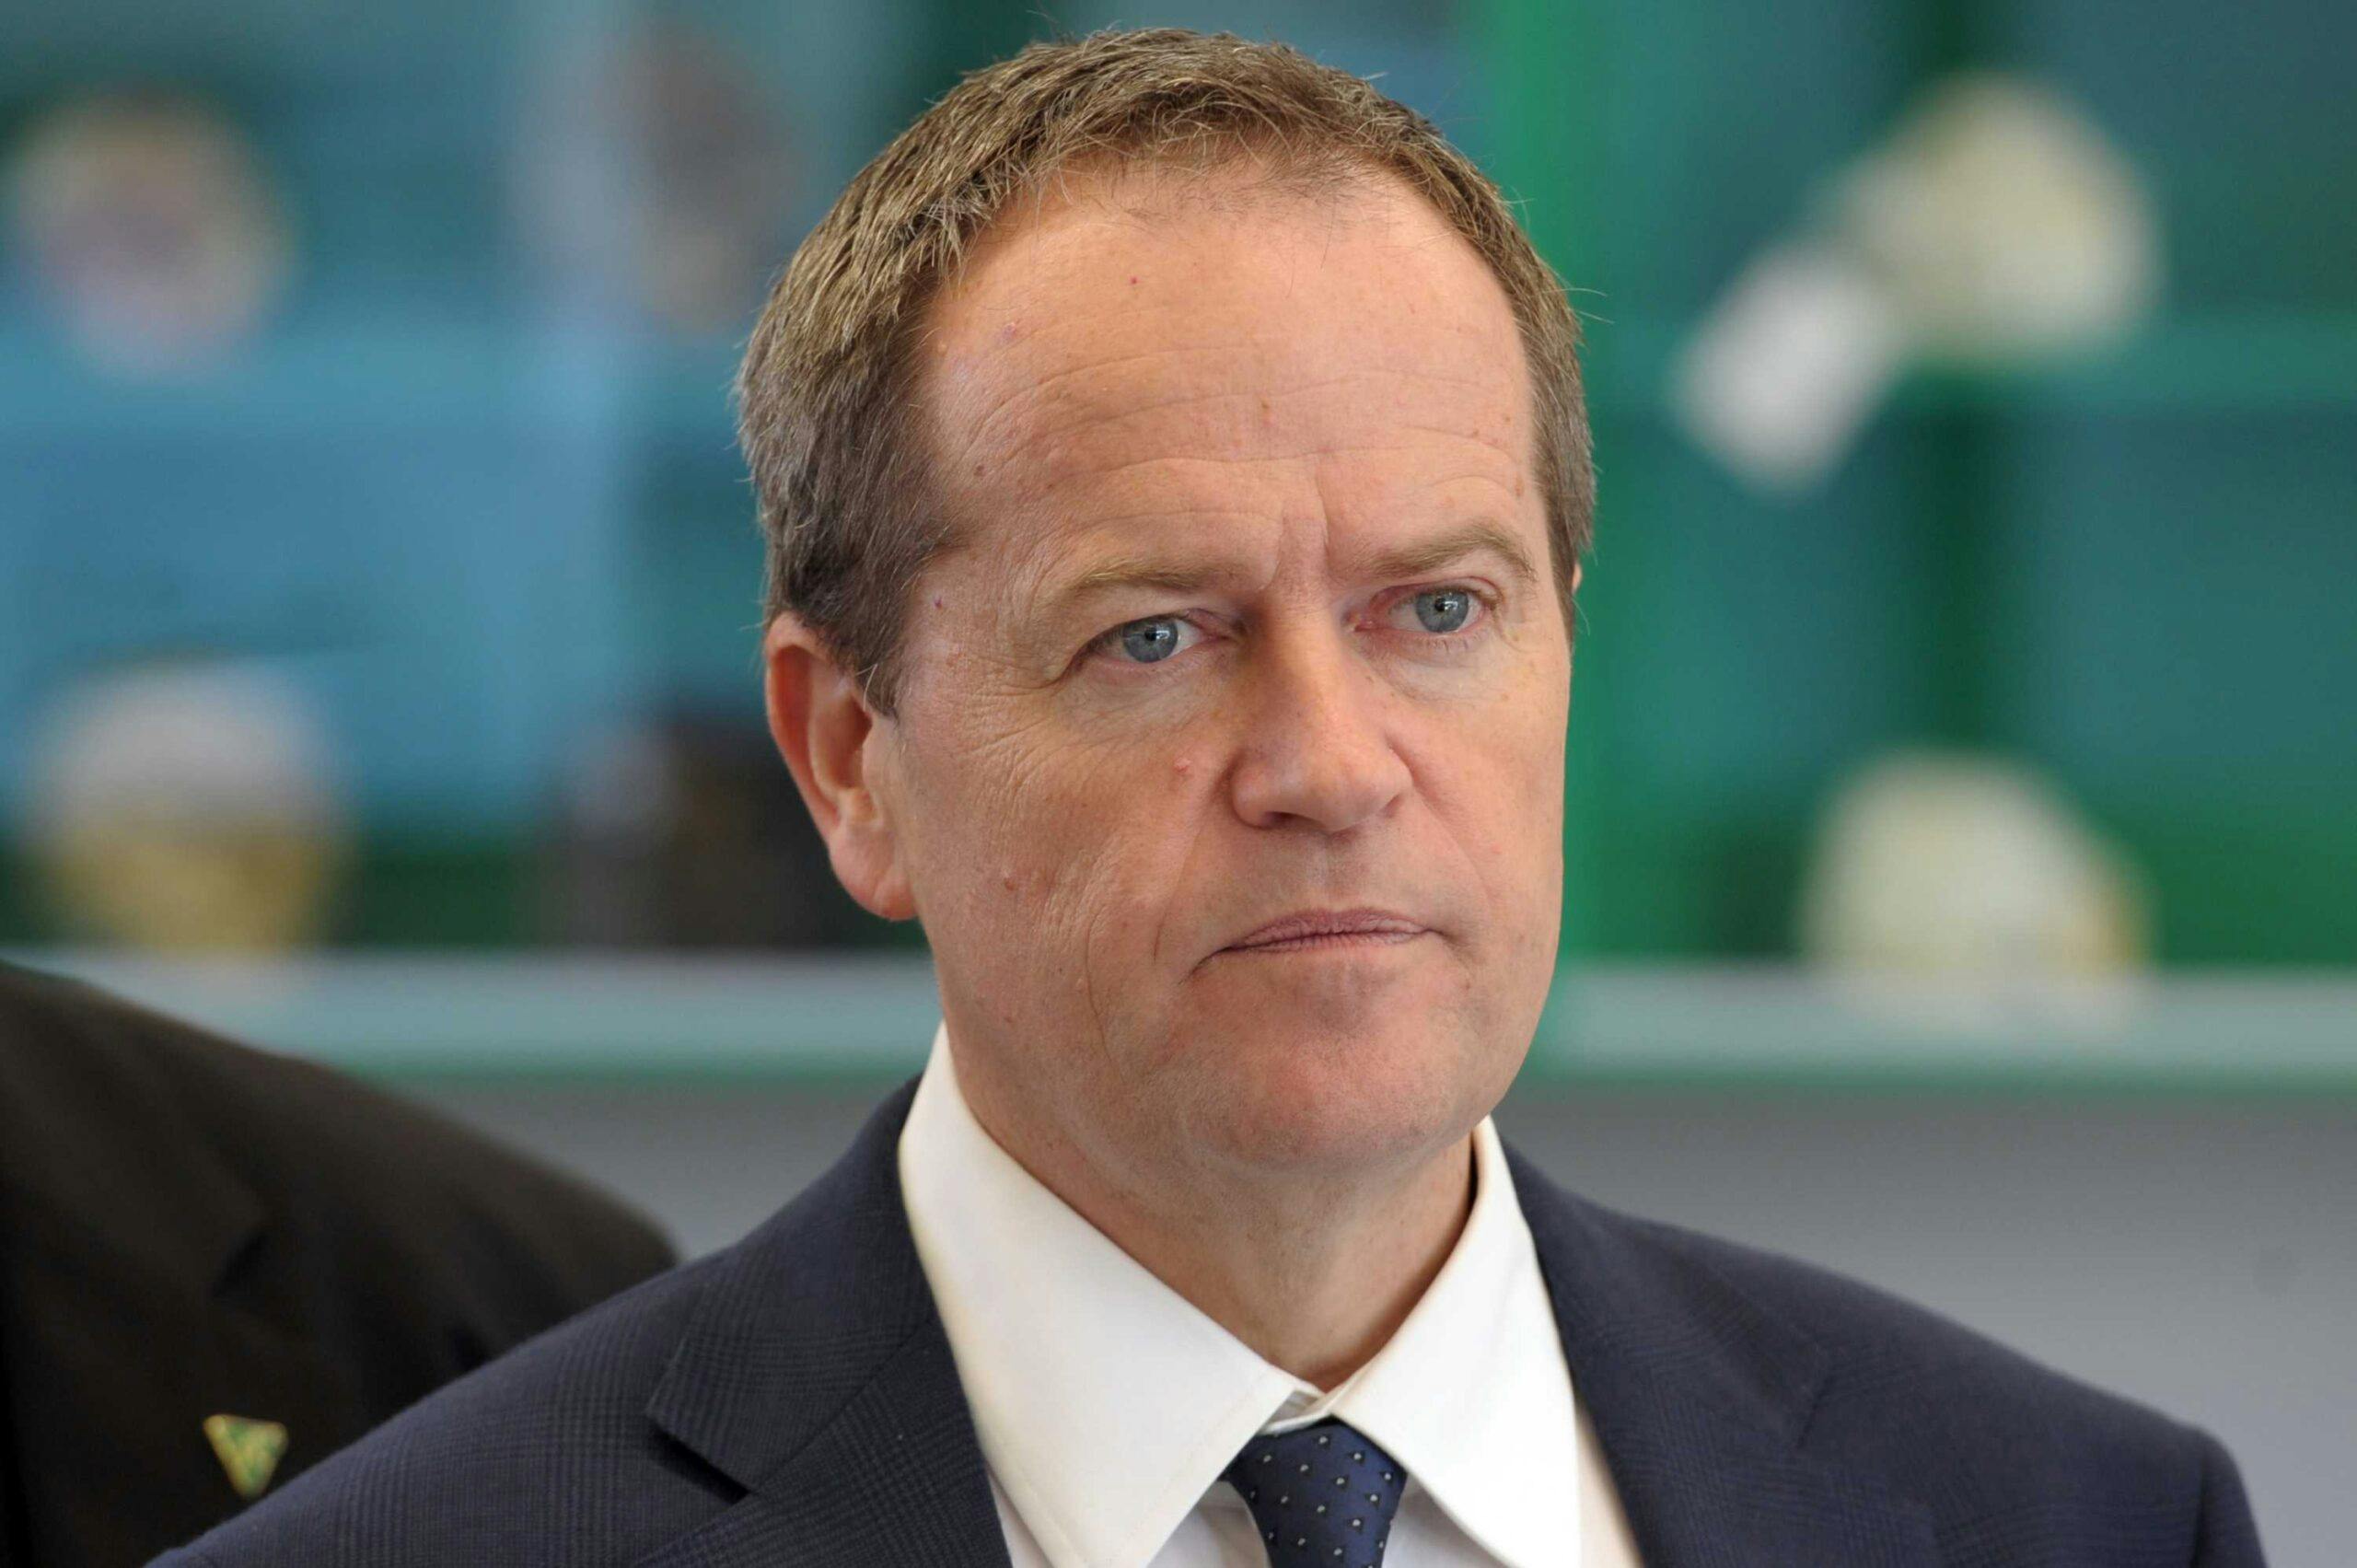 Labor offers partnership with government on climate change